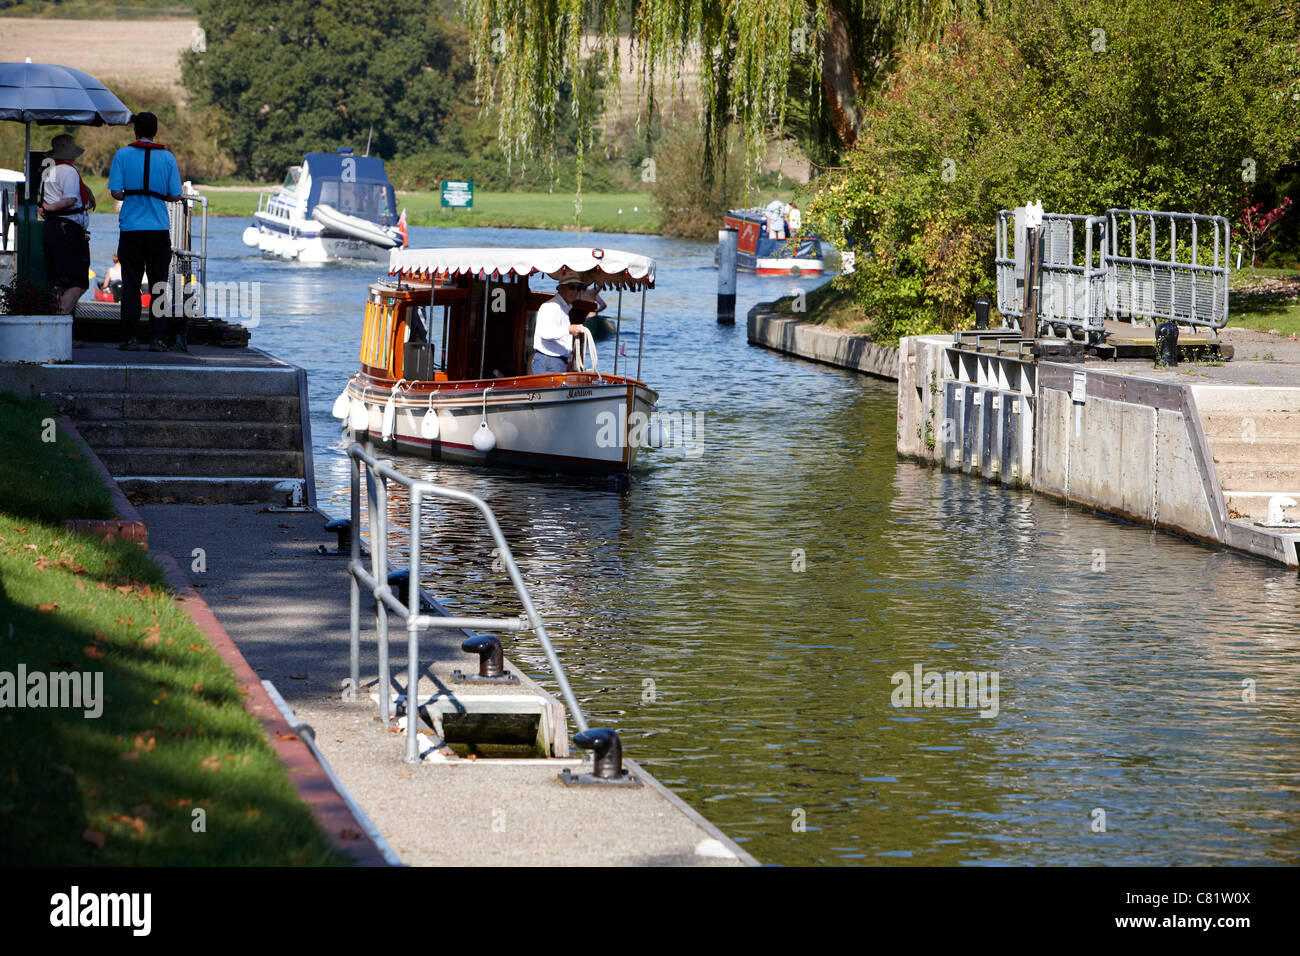 A Thames Cruiser entering the lock at Maple Durham, Berkshire. Stock Photo